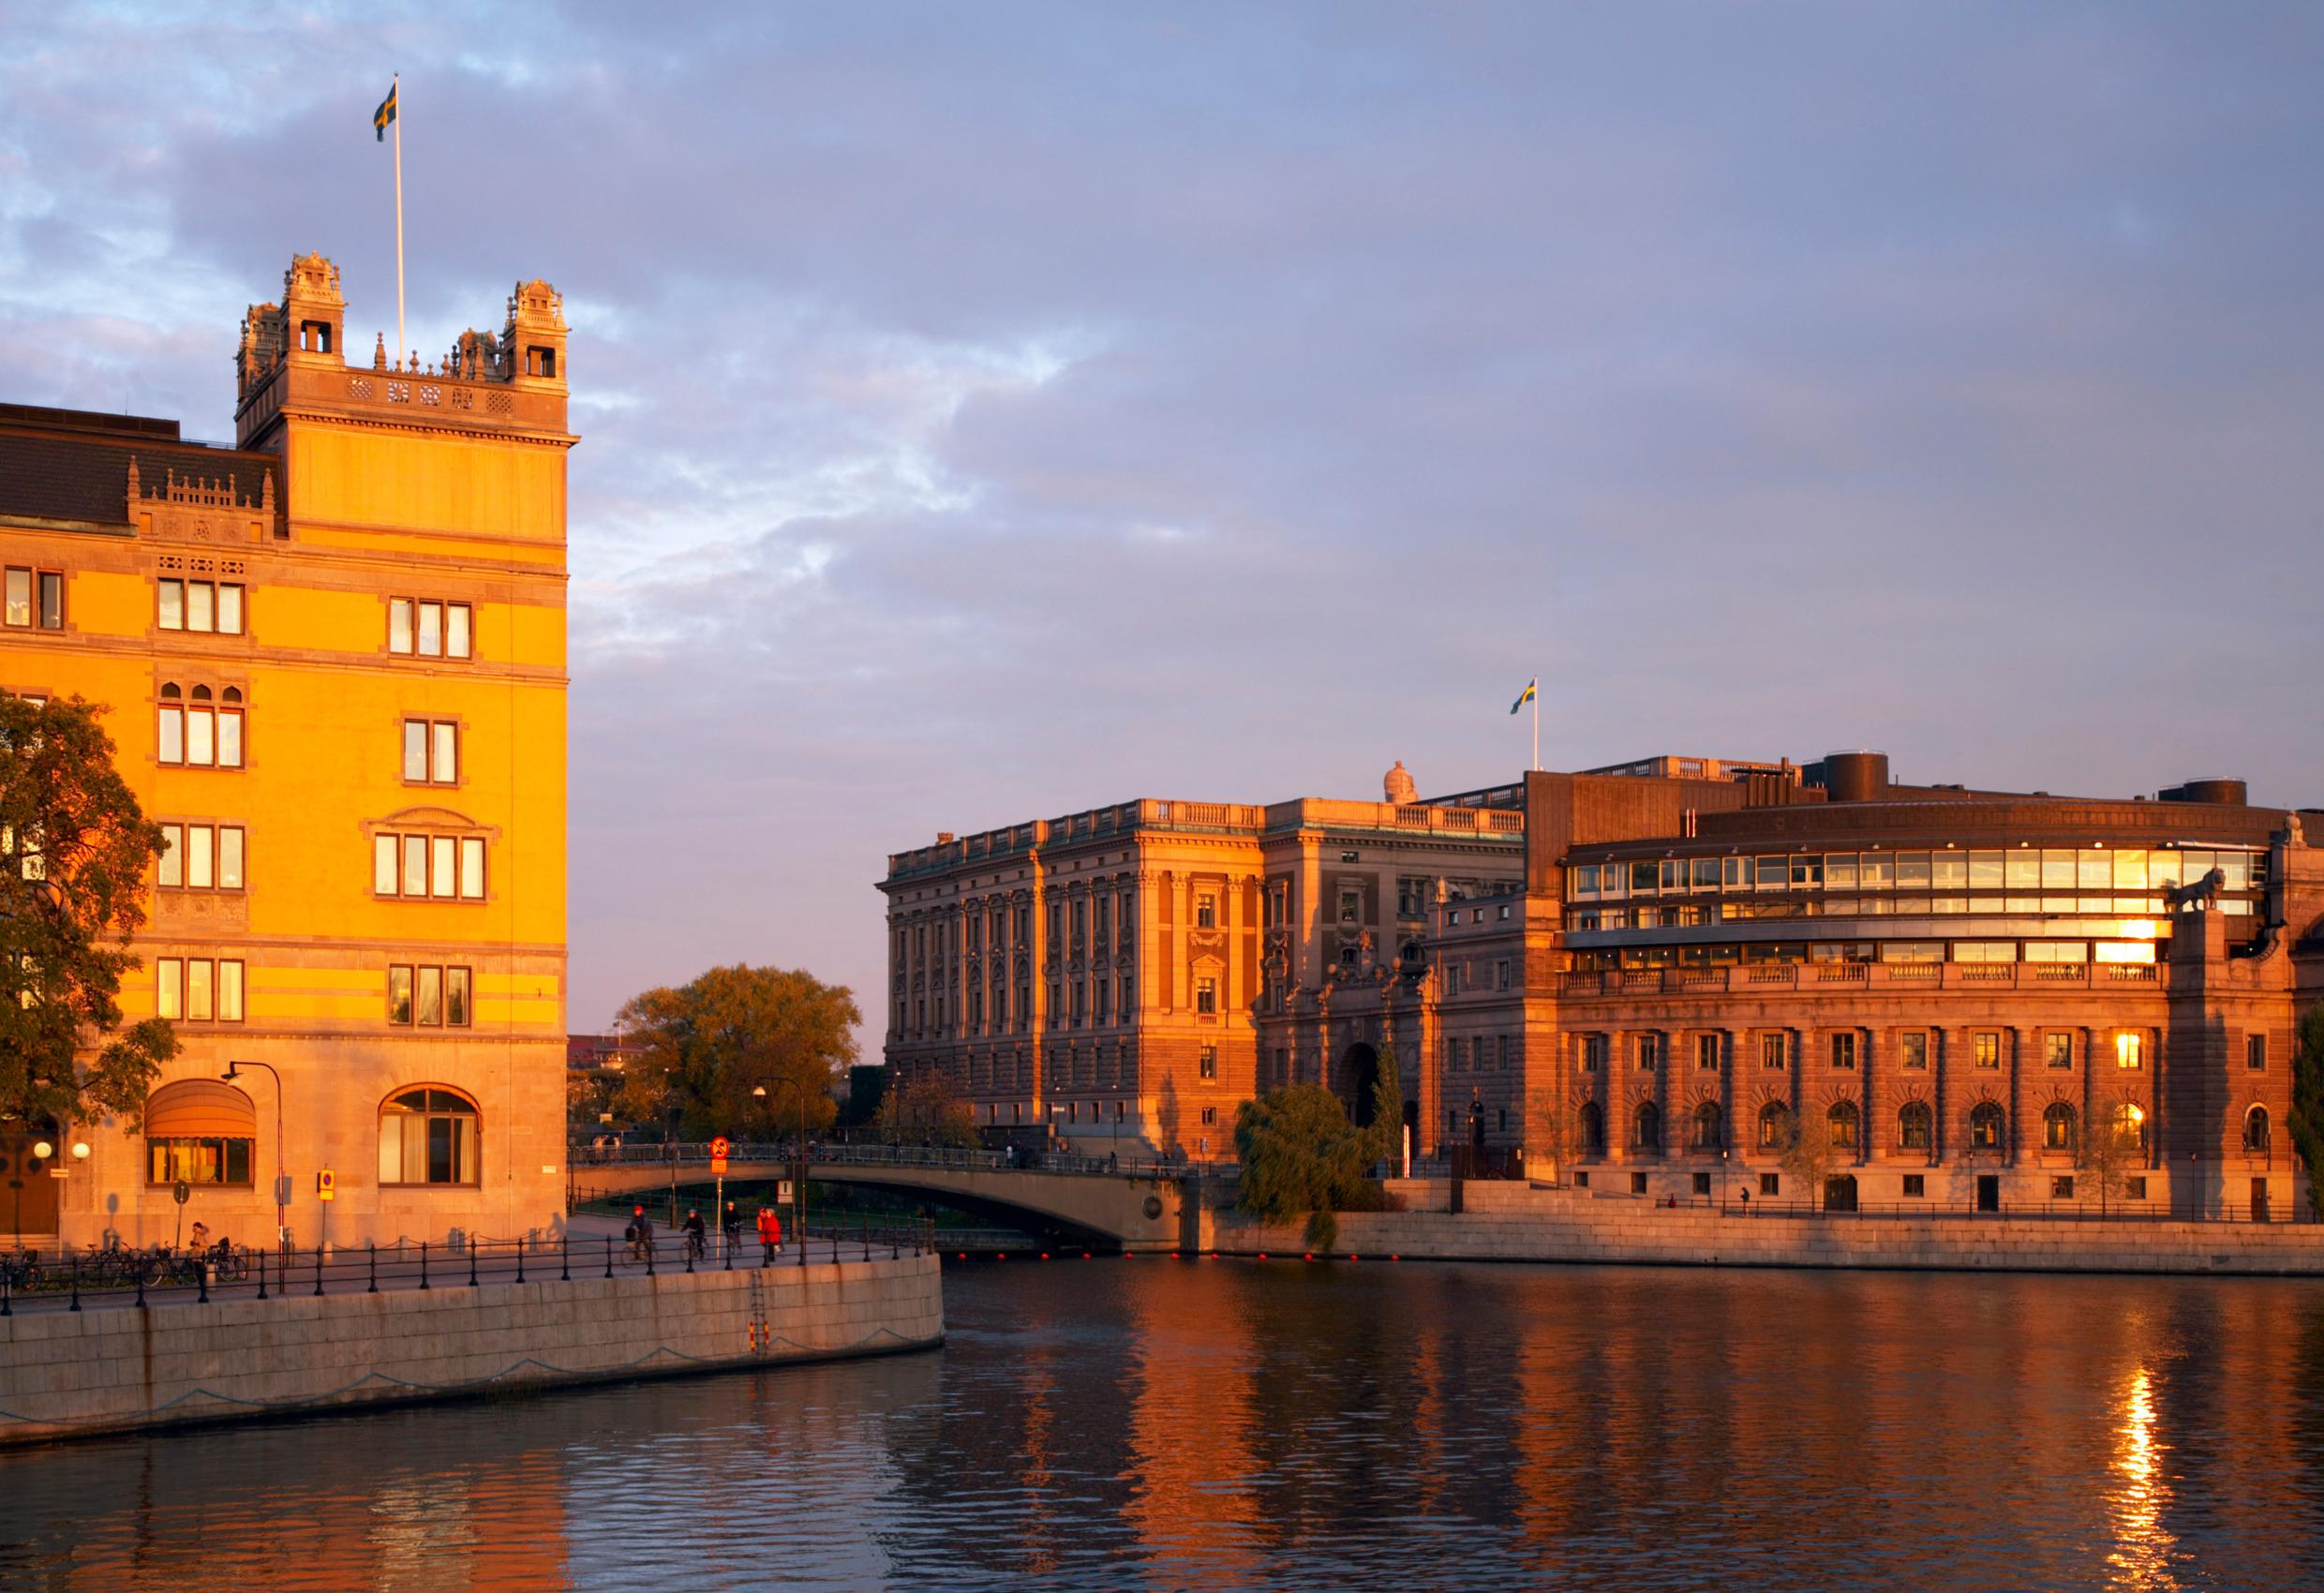 The offices of the Prime Minister, Rosenbad, to the left and the Swedish Parliament to the right. How democracy works is part of the key facts about Sweden.